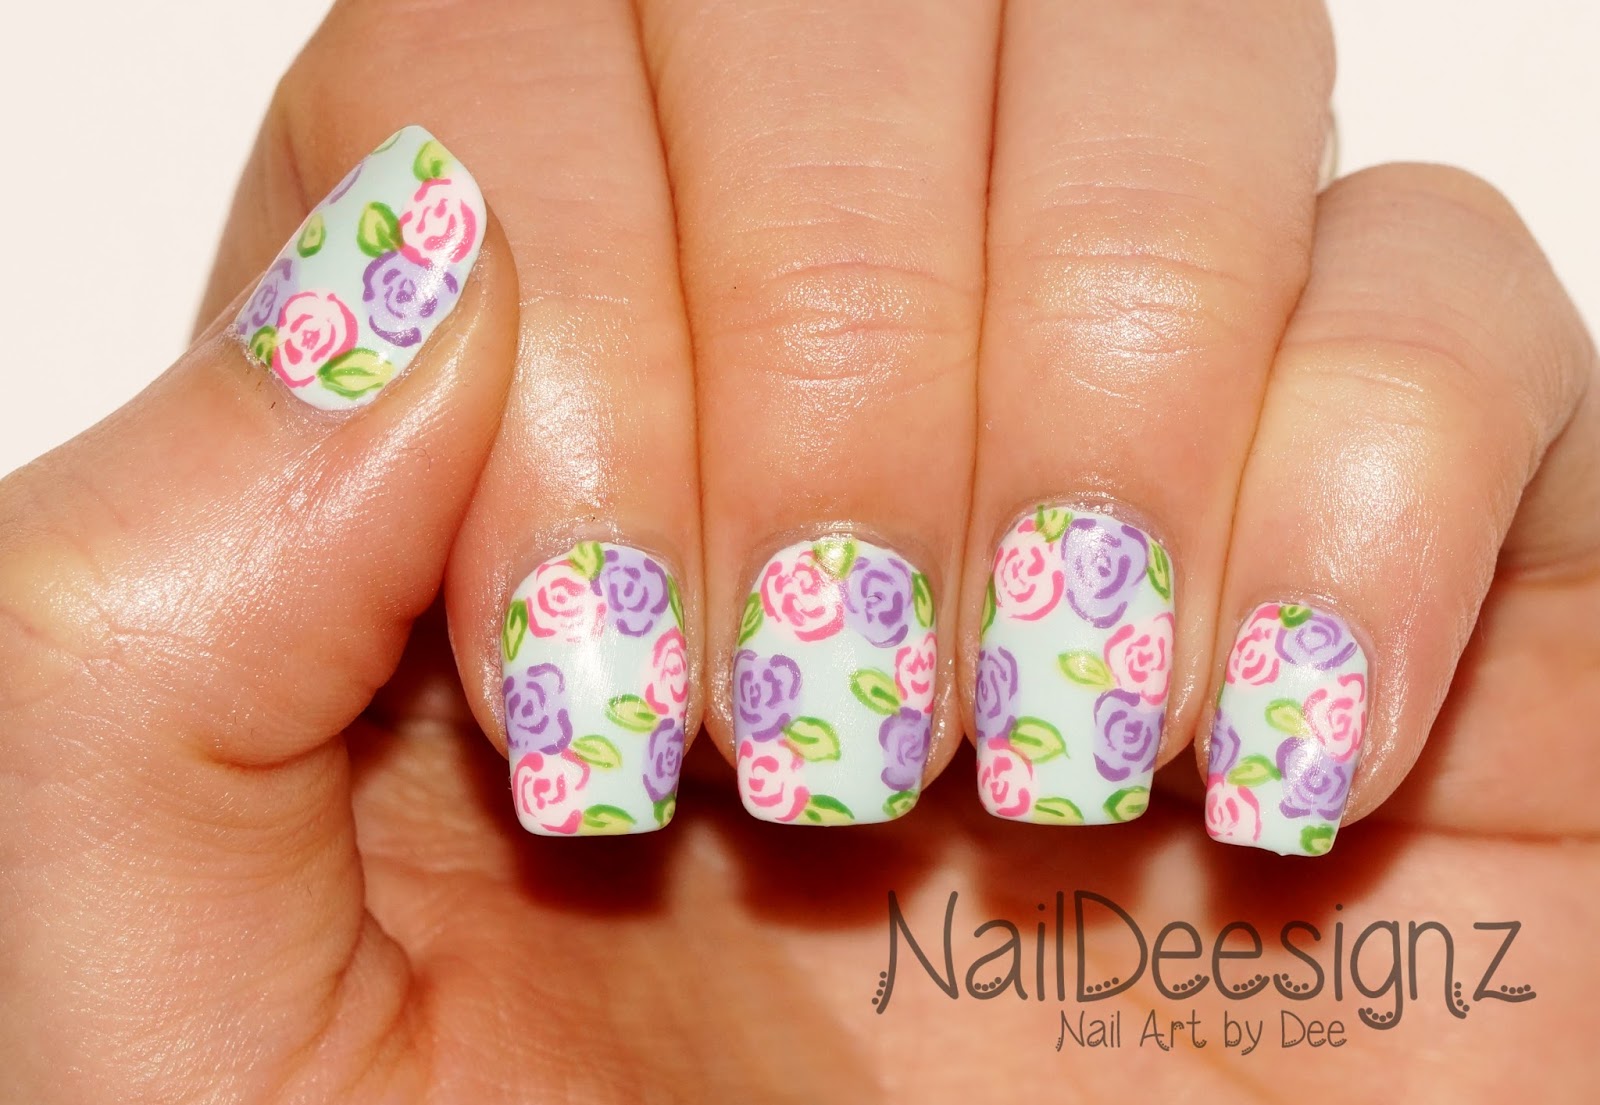 1. Floral Nail Art Designs for a Feminine Look - wide 7